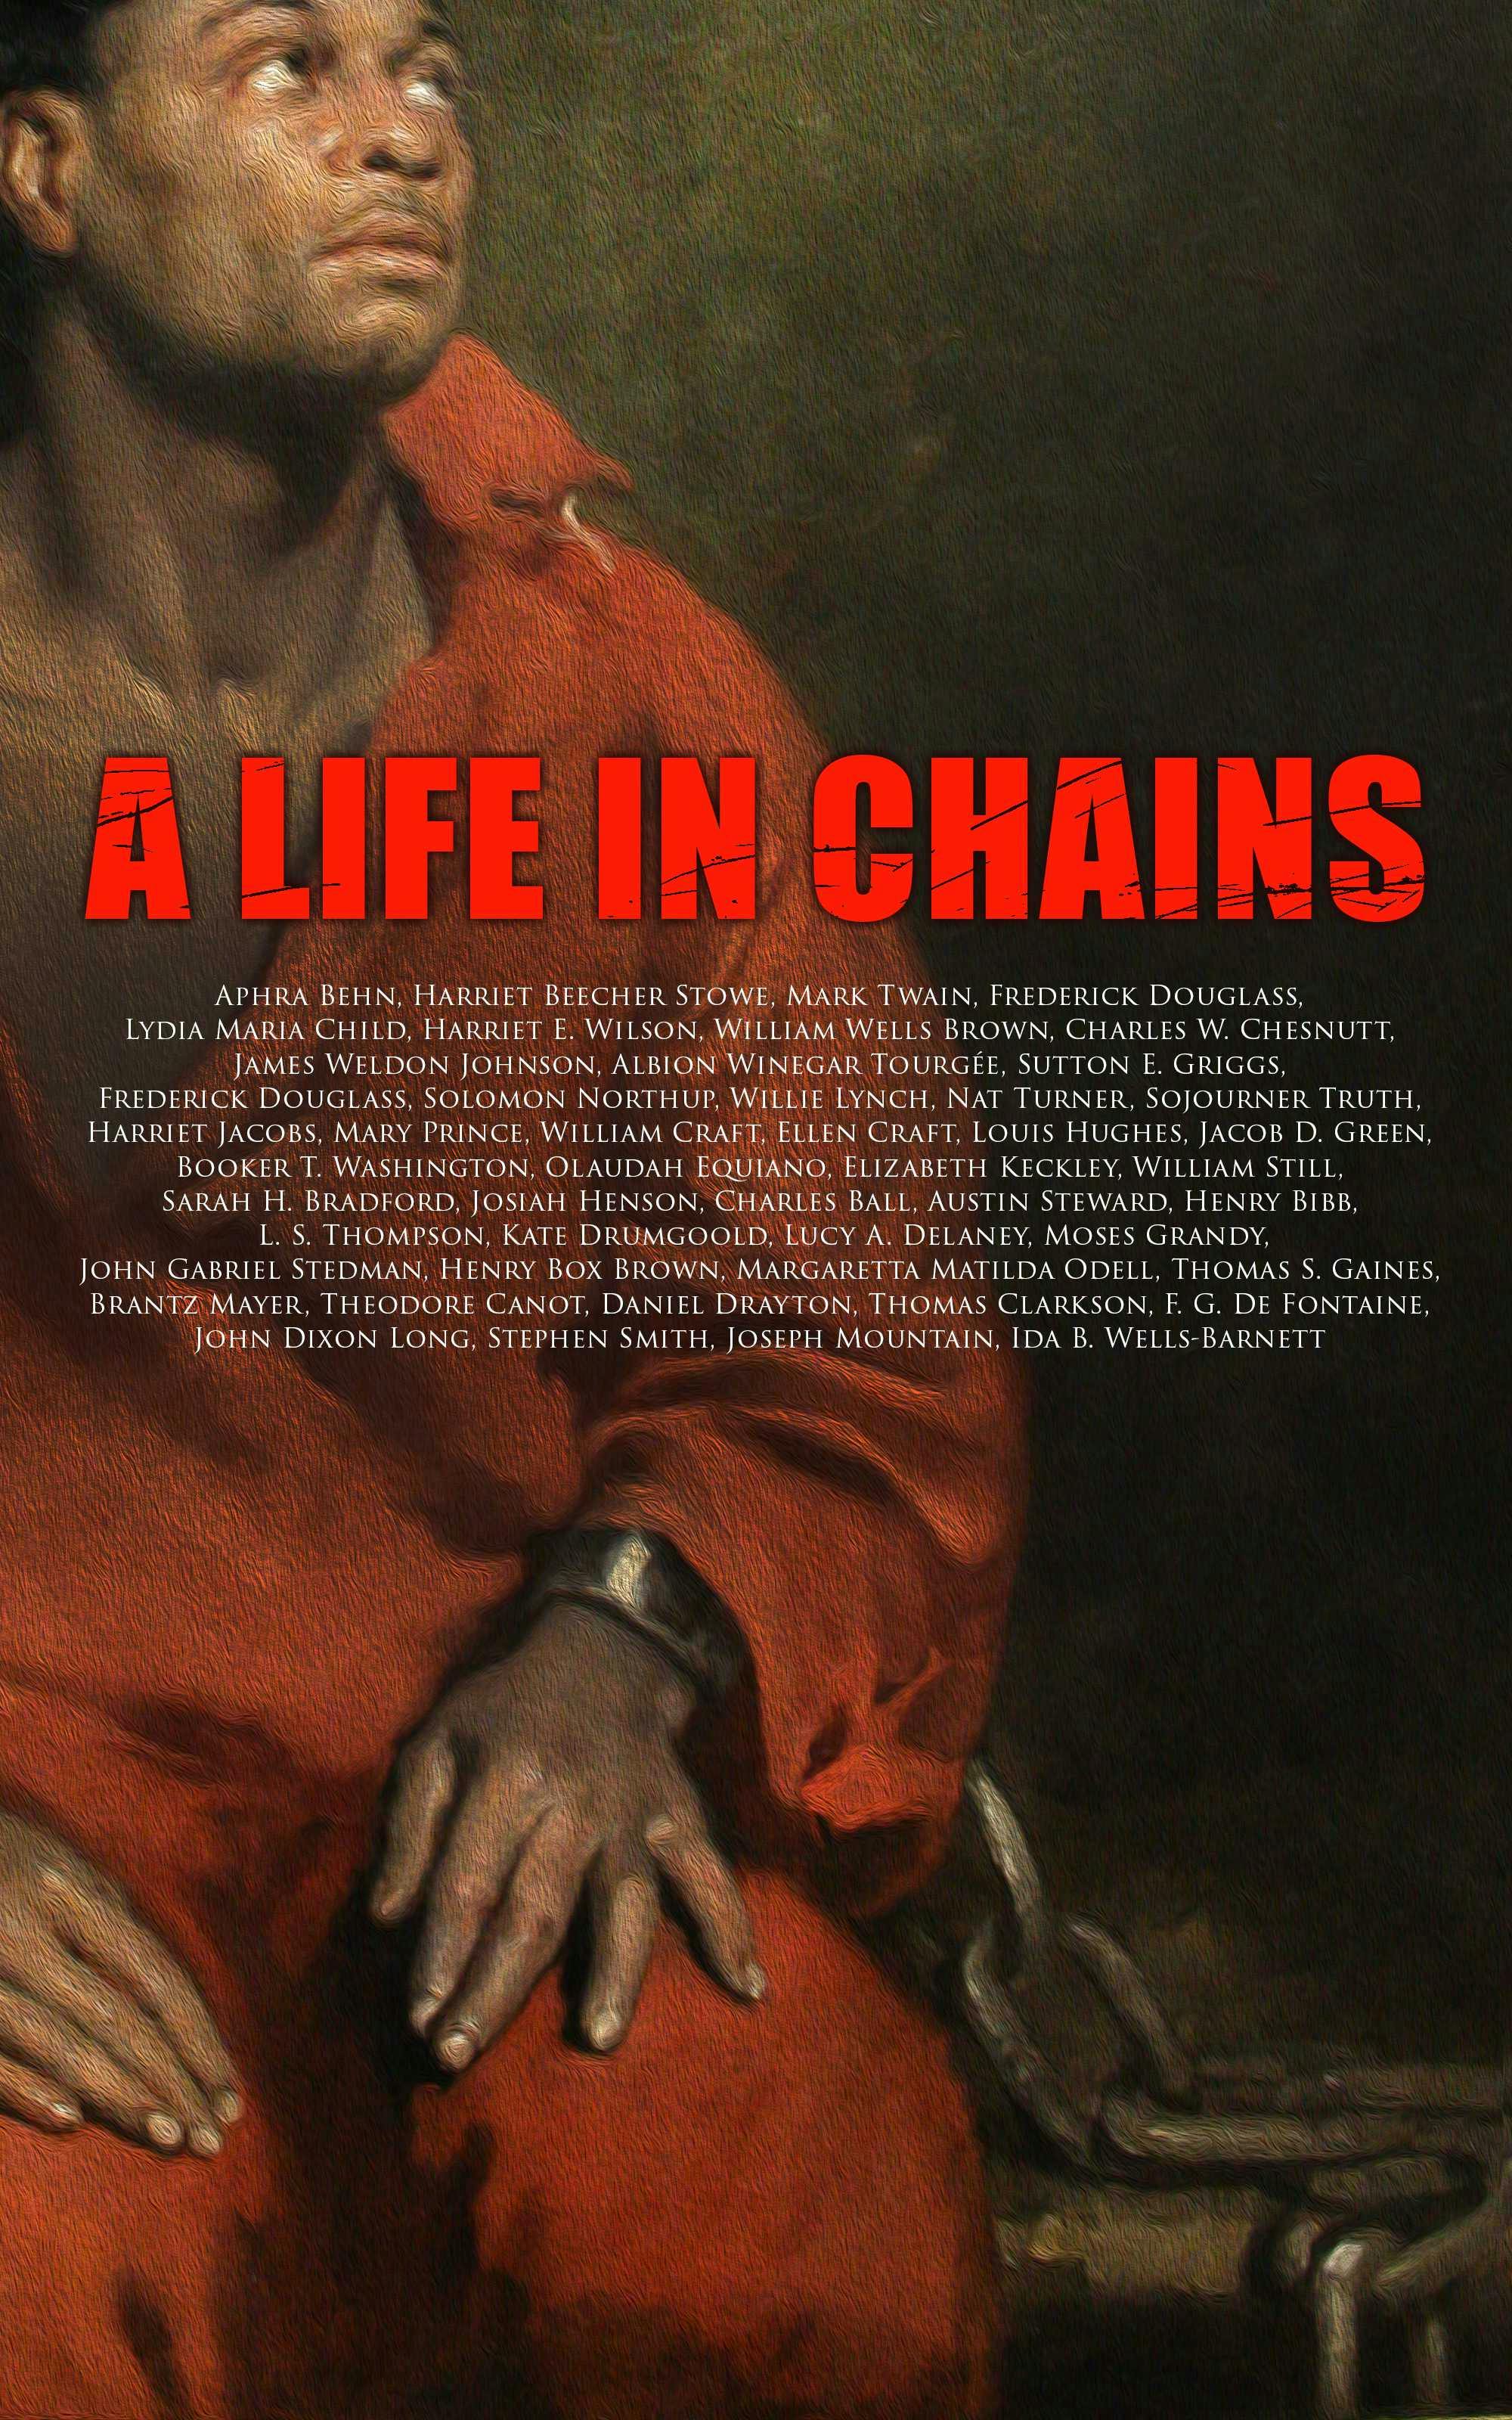 A Life in Chains: The Juneteenth Edition: Novels, Memoirs, Interviews, Testimonies, Studies, Official Records on Slavery and Abolitionism - undefined